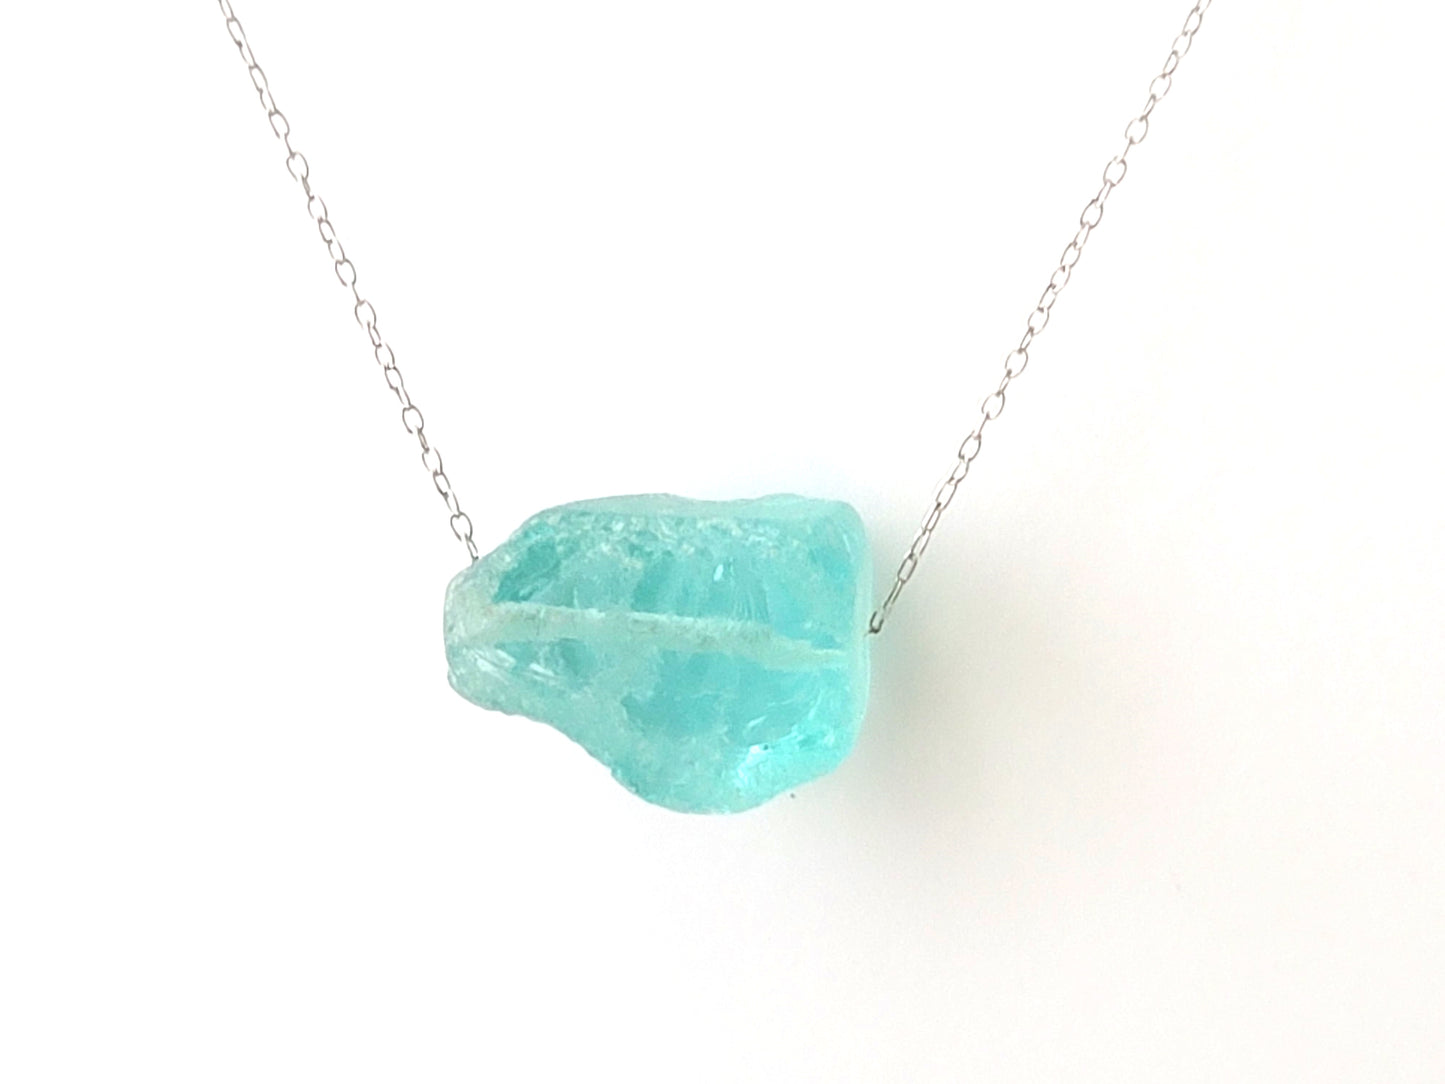 Aqua Quartz Crystal Nugget Minimalist Necklace, a rough Blue Quartz nugget on an Upcycled Vintage Sterling Silver chain, on white background